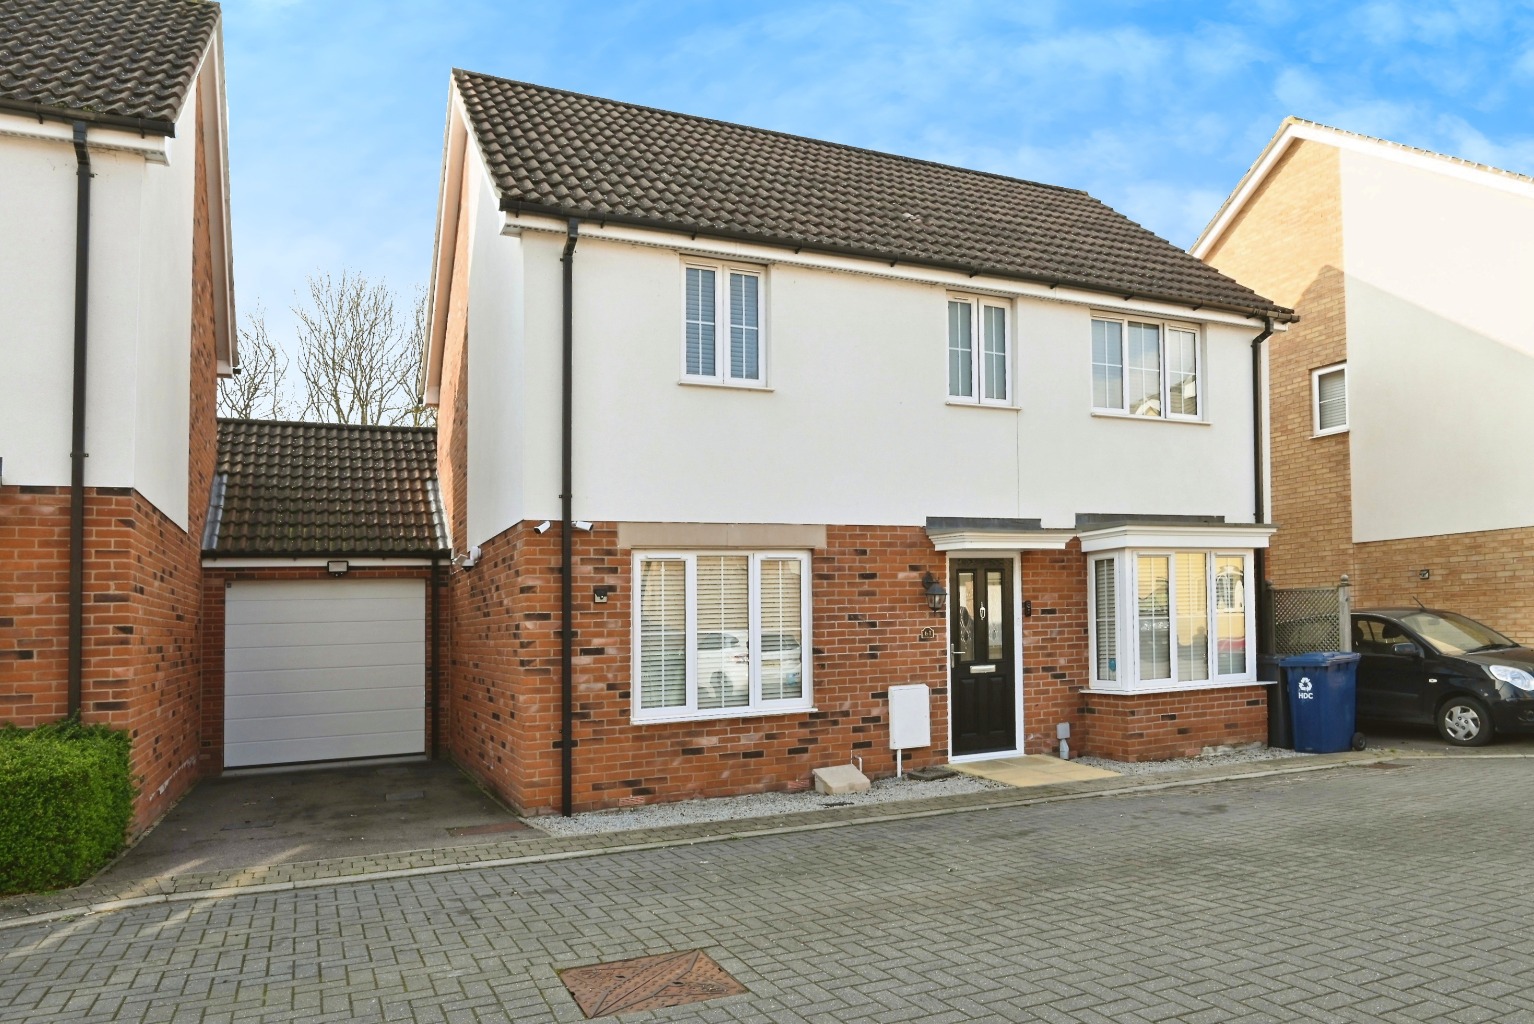 3 bed detached house for sale in Bargroves Avenue, St Neots  - Property Image 1